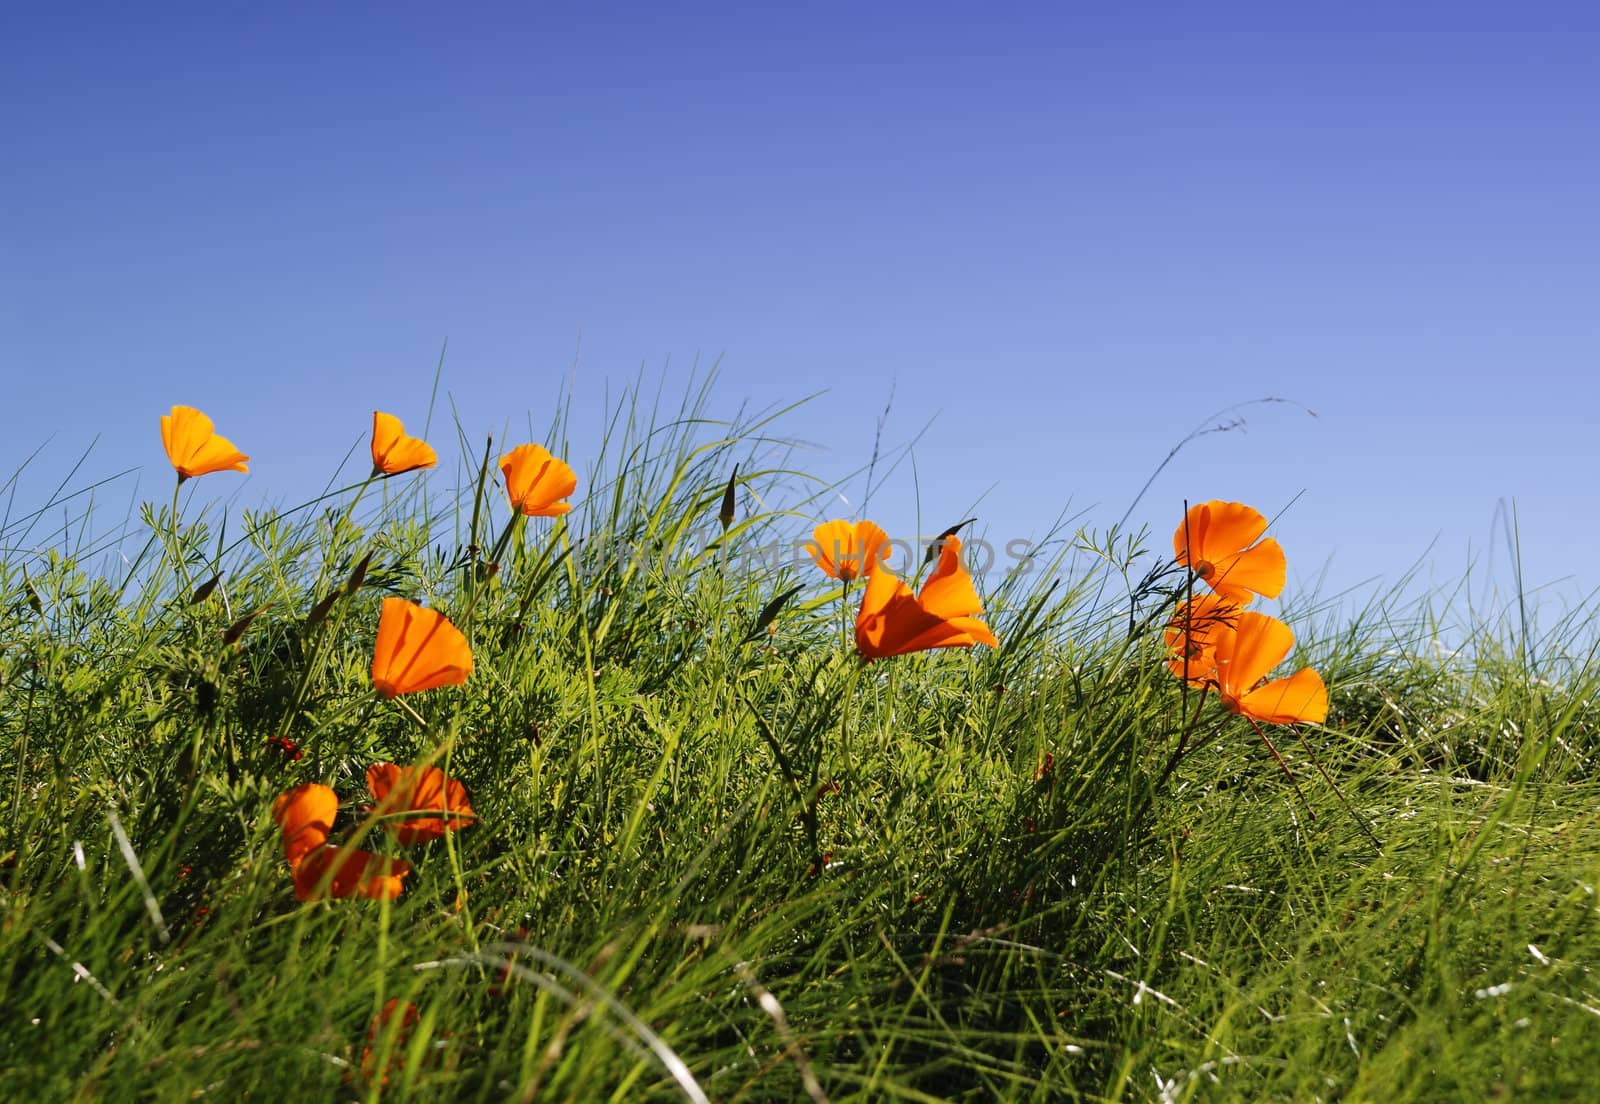 Californian poppy in the grass with blue sky in background